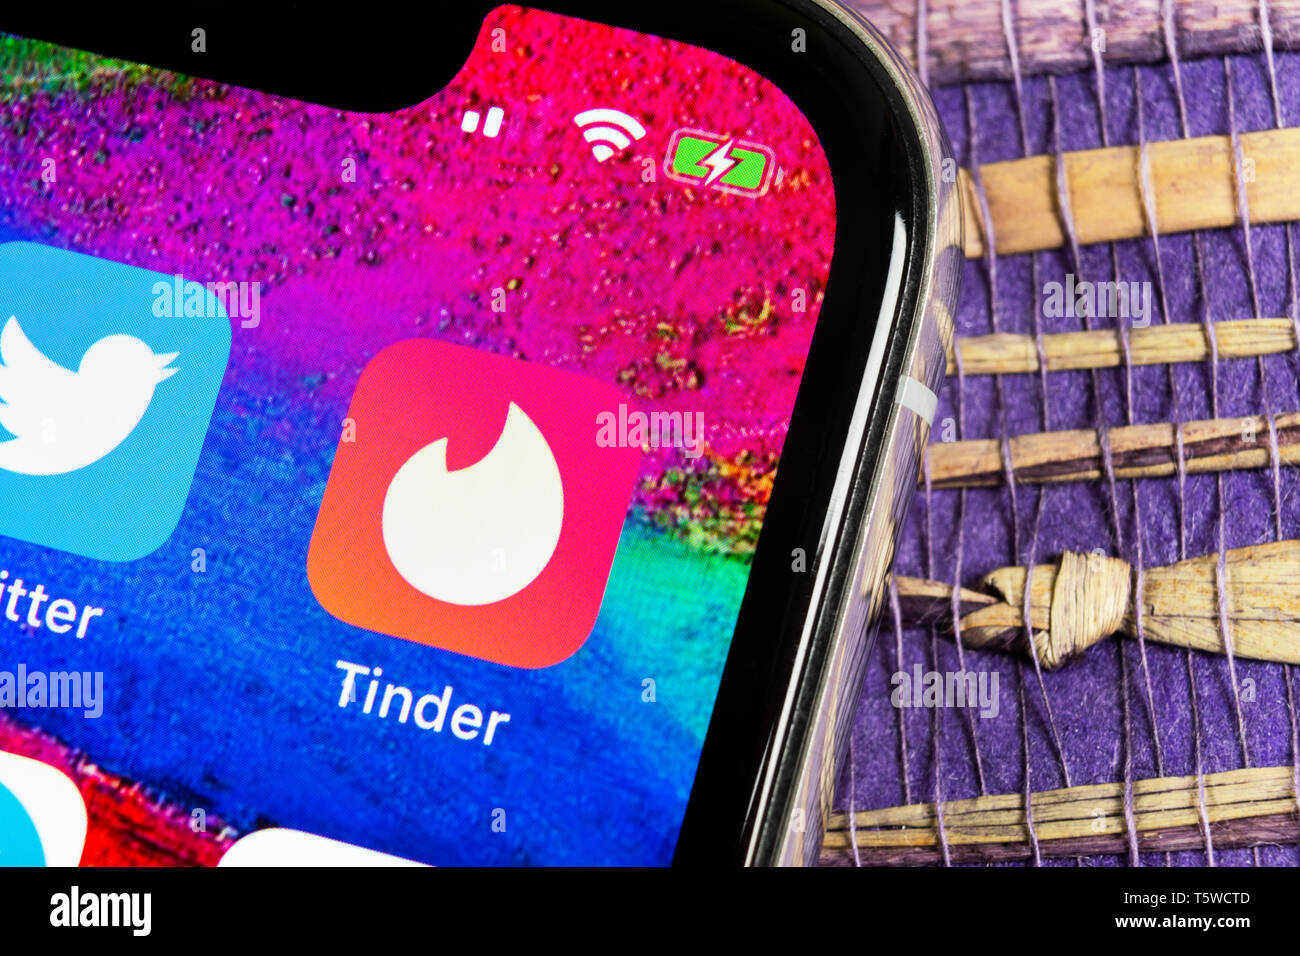 Helsinki Finland February 17 19 Tinder Application Icon On Apple Iphone X Screen Close Up Tinder App Icon Tinder Application Social Media Ico Stock Photo Alamy